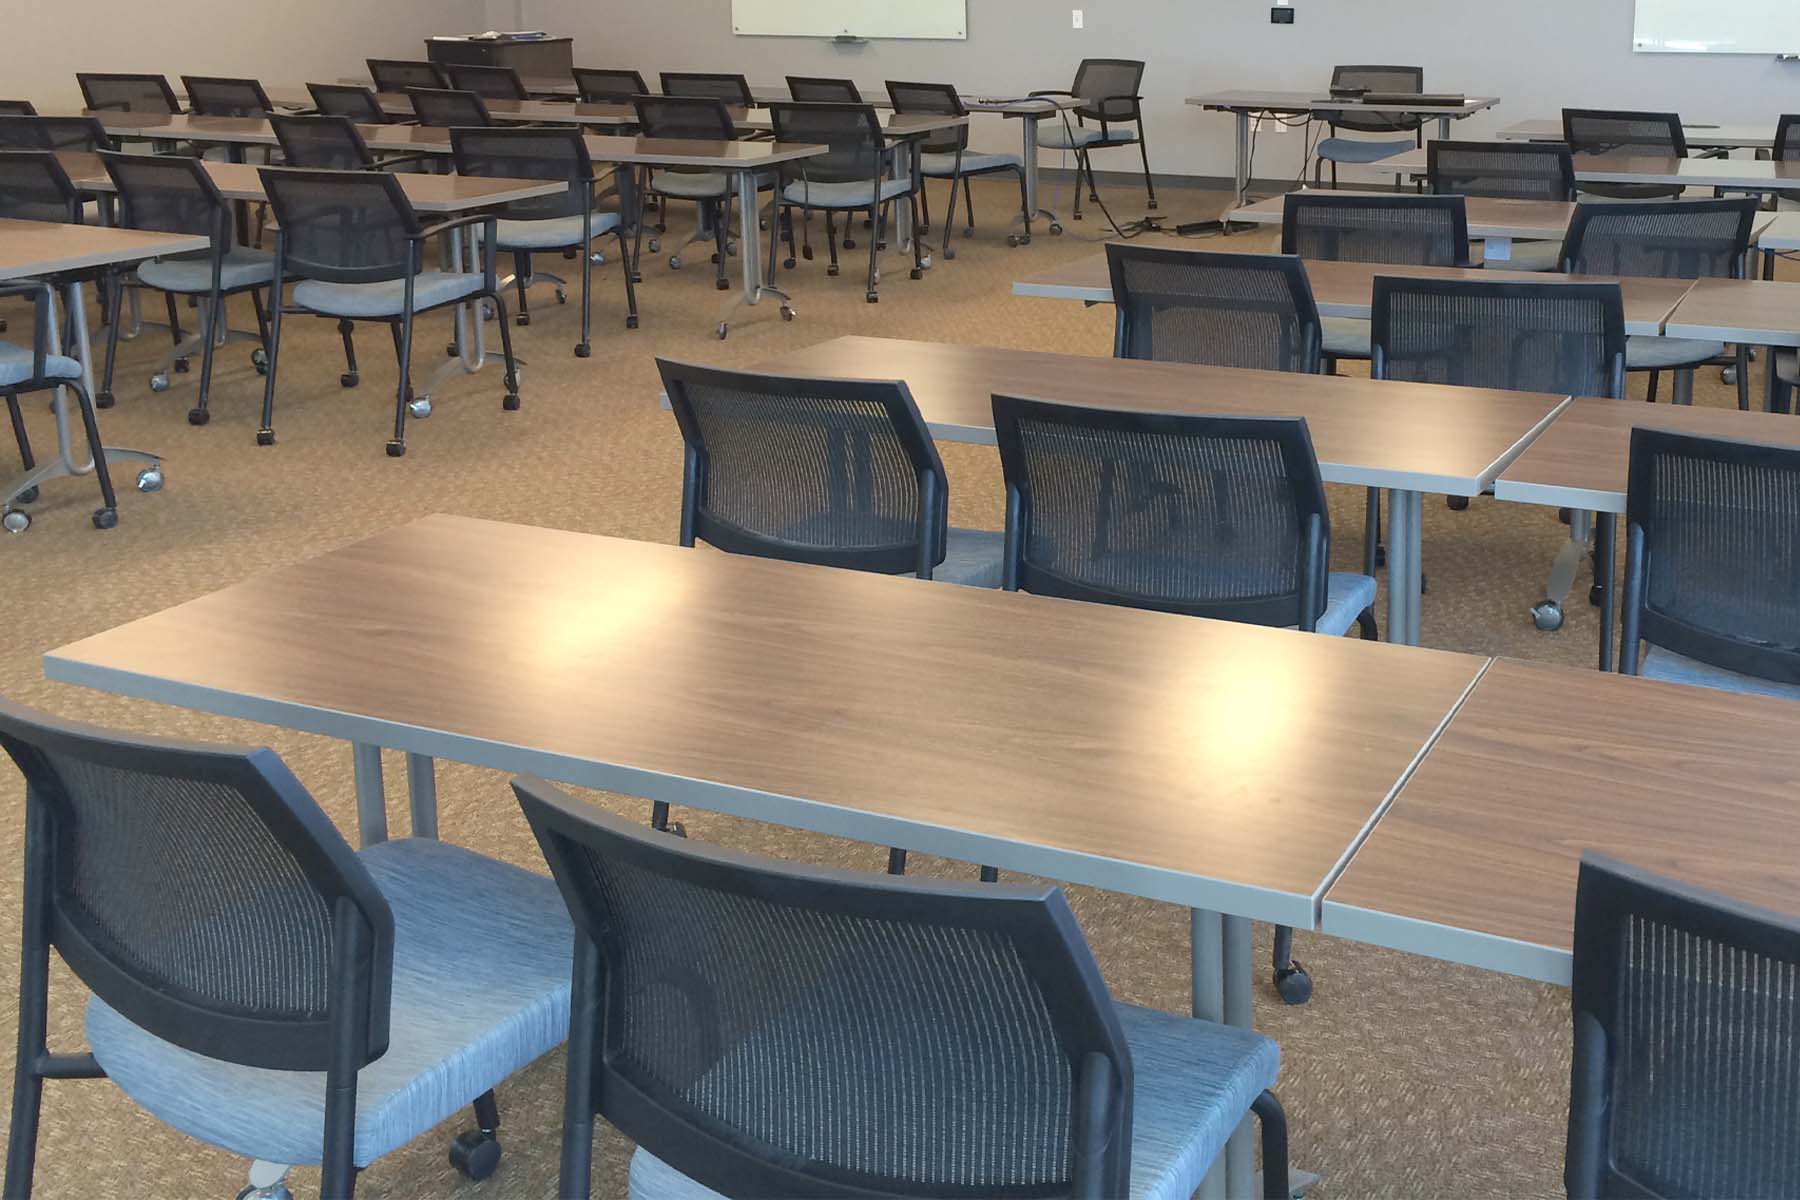 Large room with rows of desks and chairs, presentation stand and whiteboards at the front